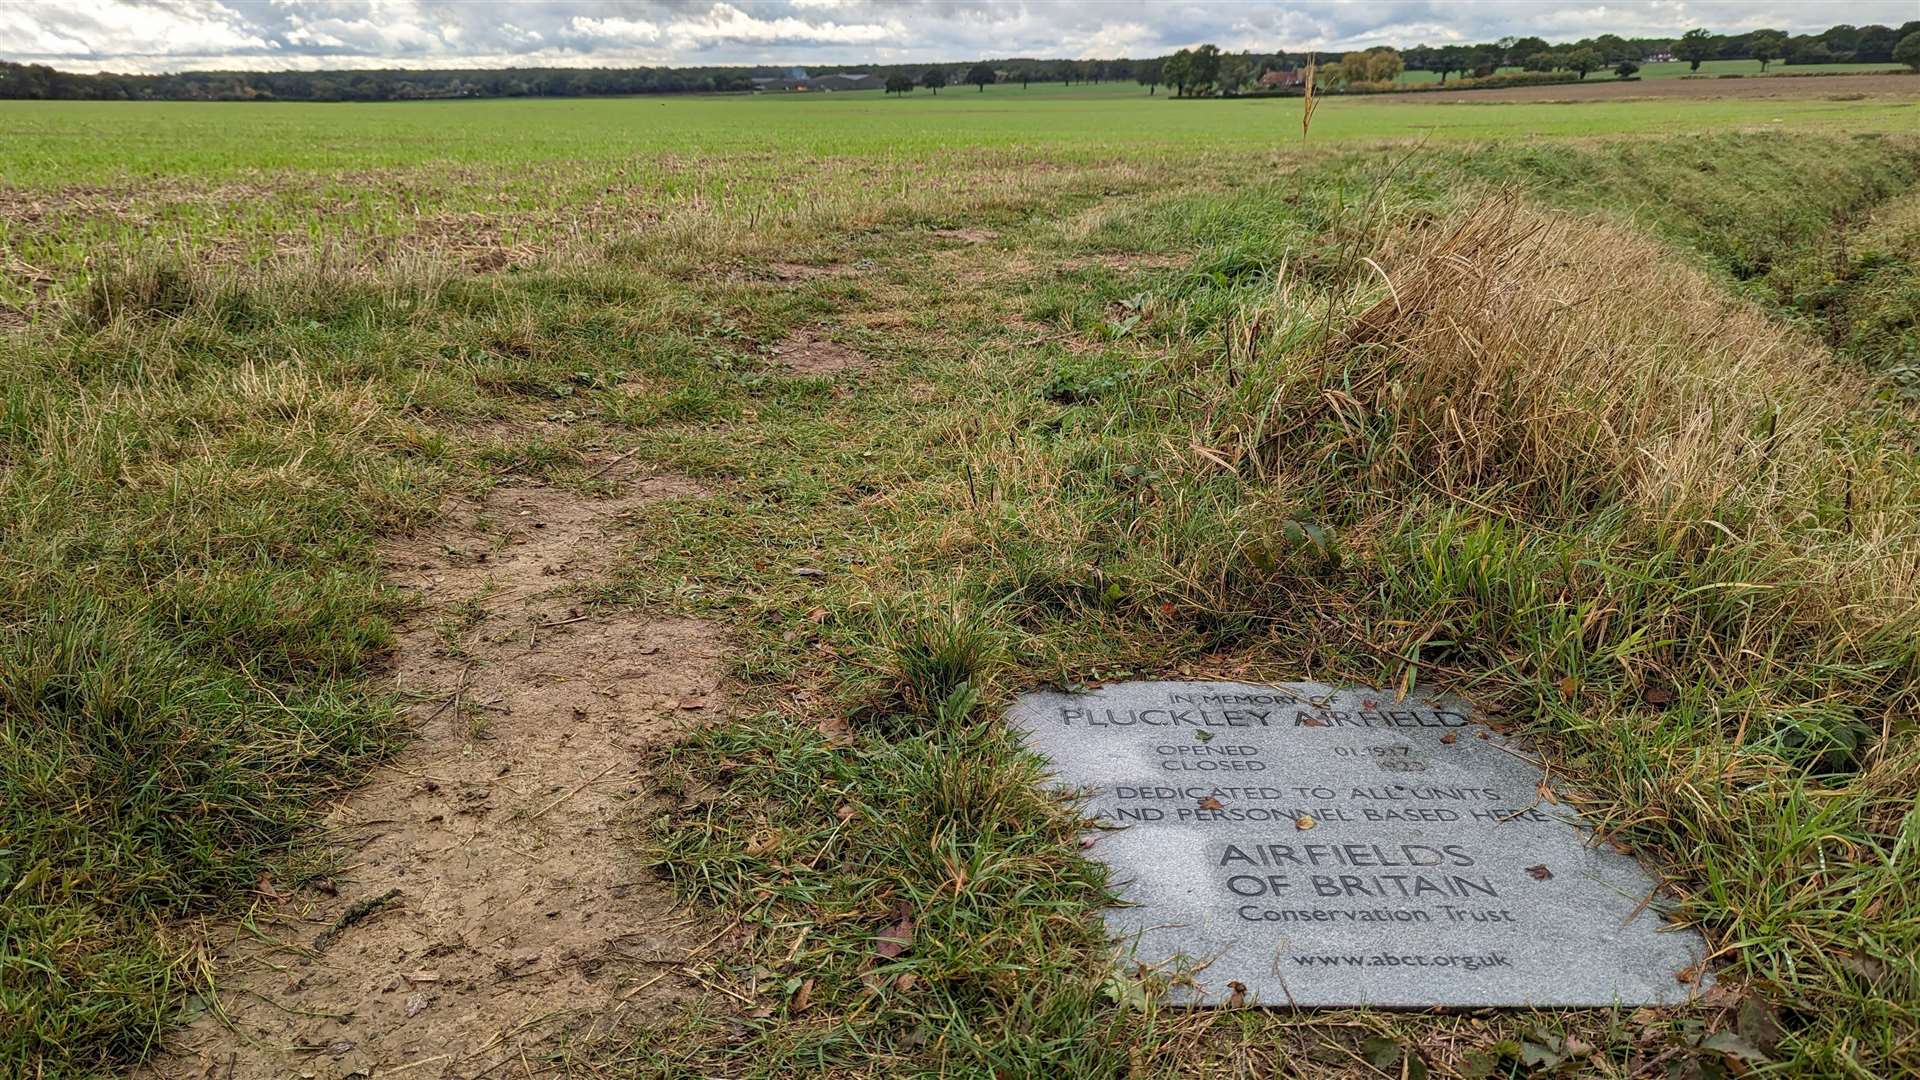 The site of the former Pluckley airfield where aircraft were based during the First World War